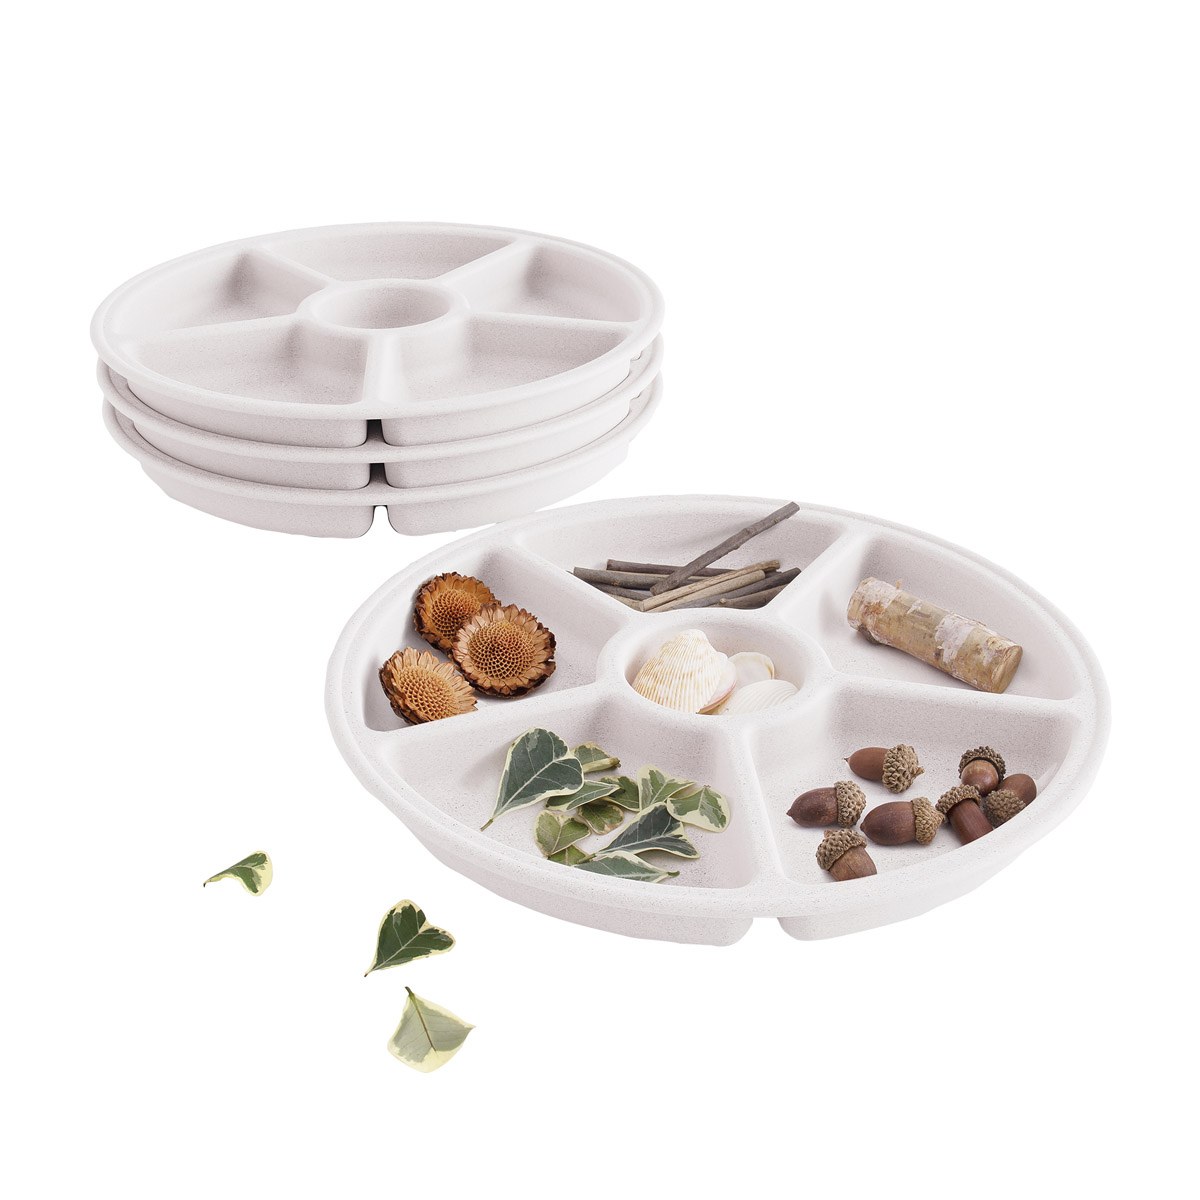 Kaplan Early Learning Company Loose Parts Sorting Trays - Set of 4 - White